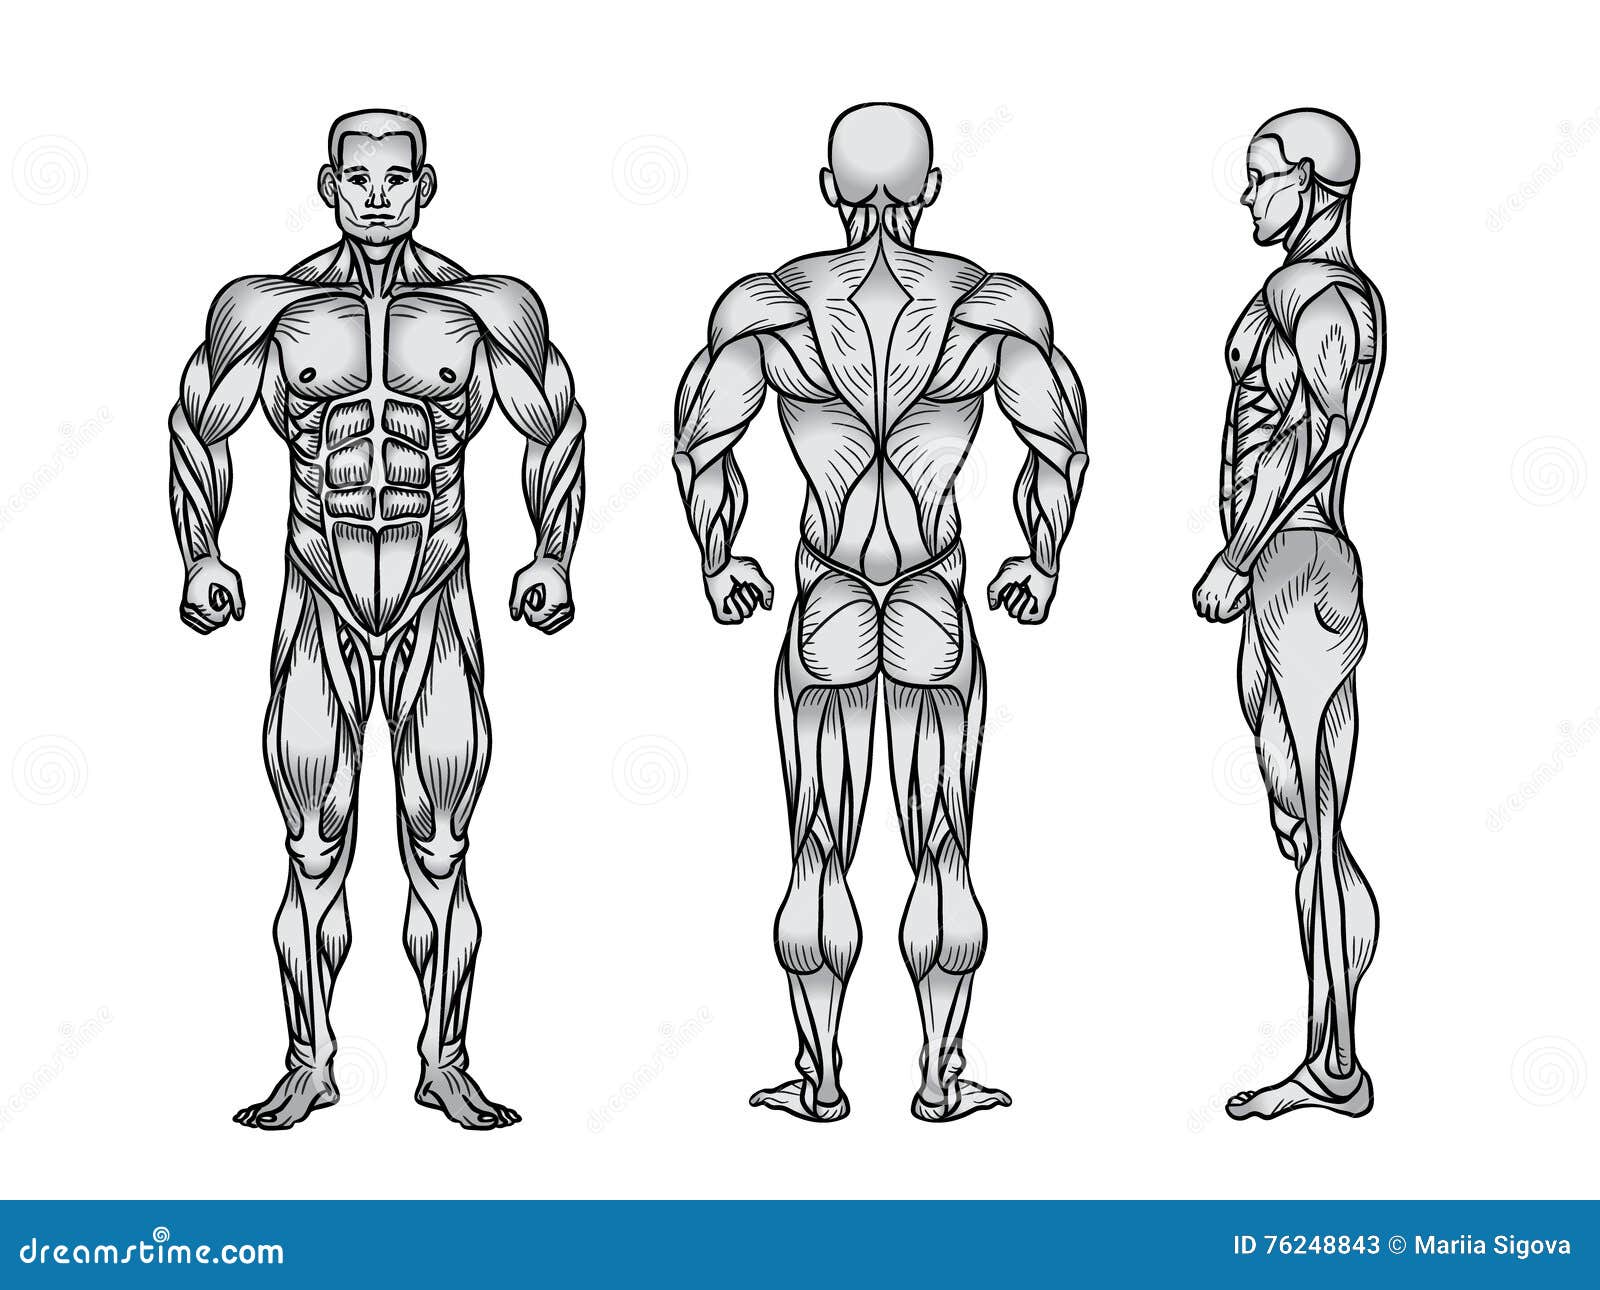 Anatomy Of Male Muscular System, Exercise And Muscle Guide. Stock Illustration - Illustration of ...